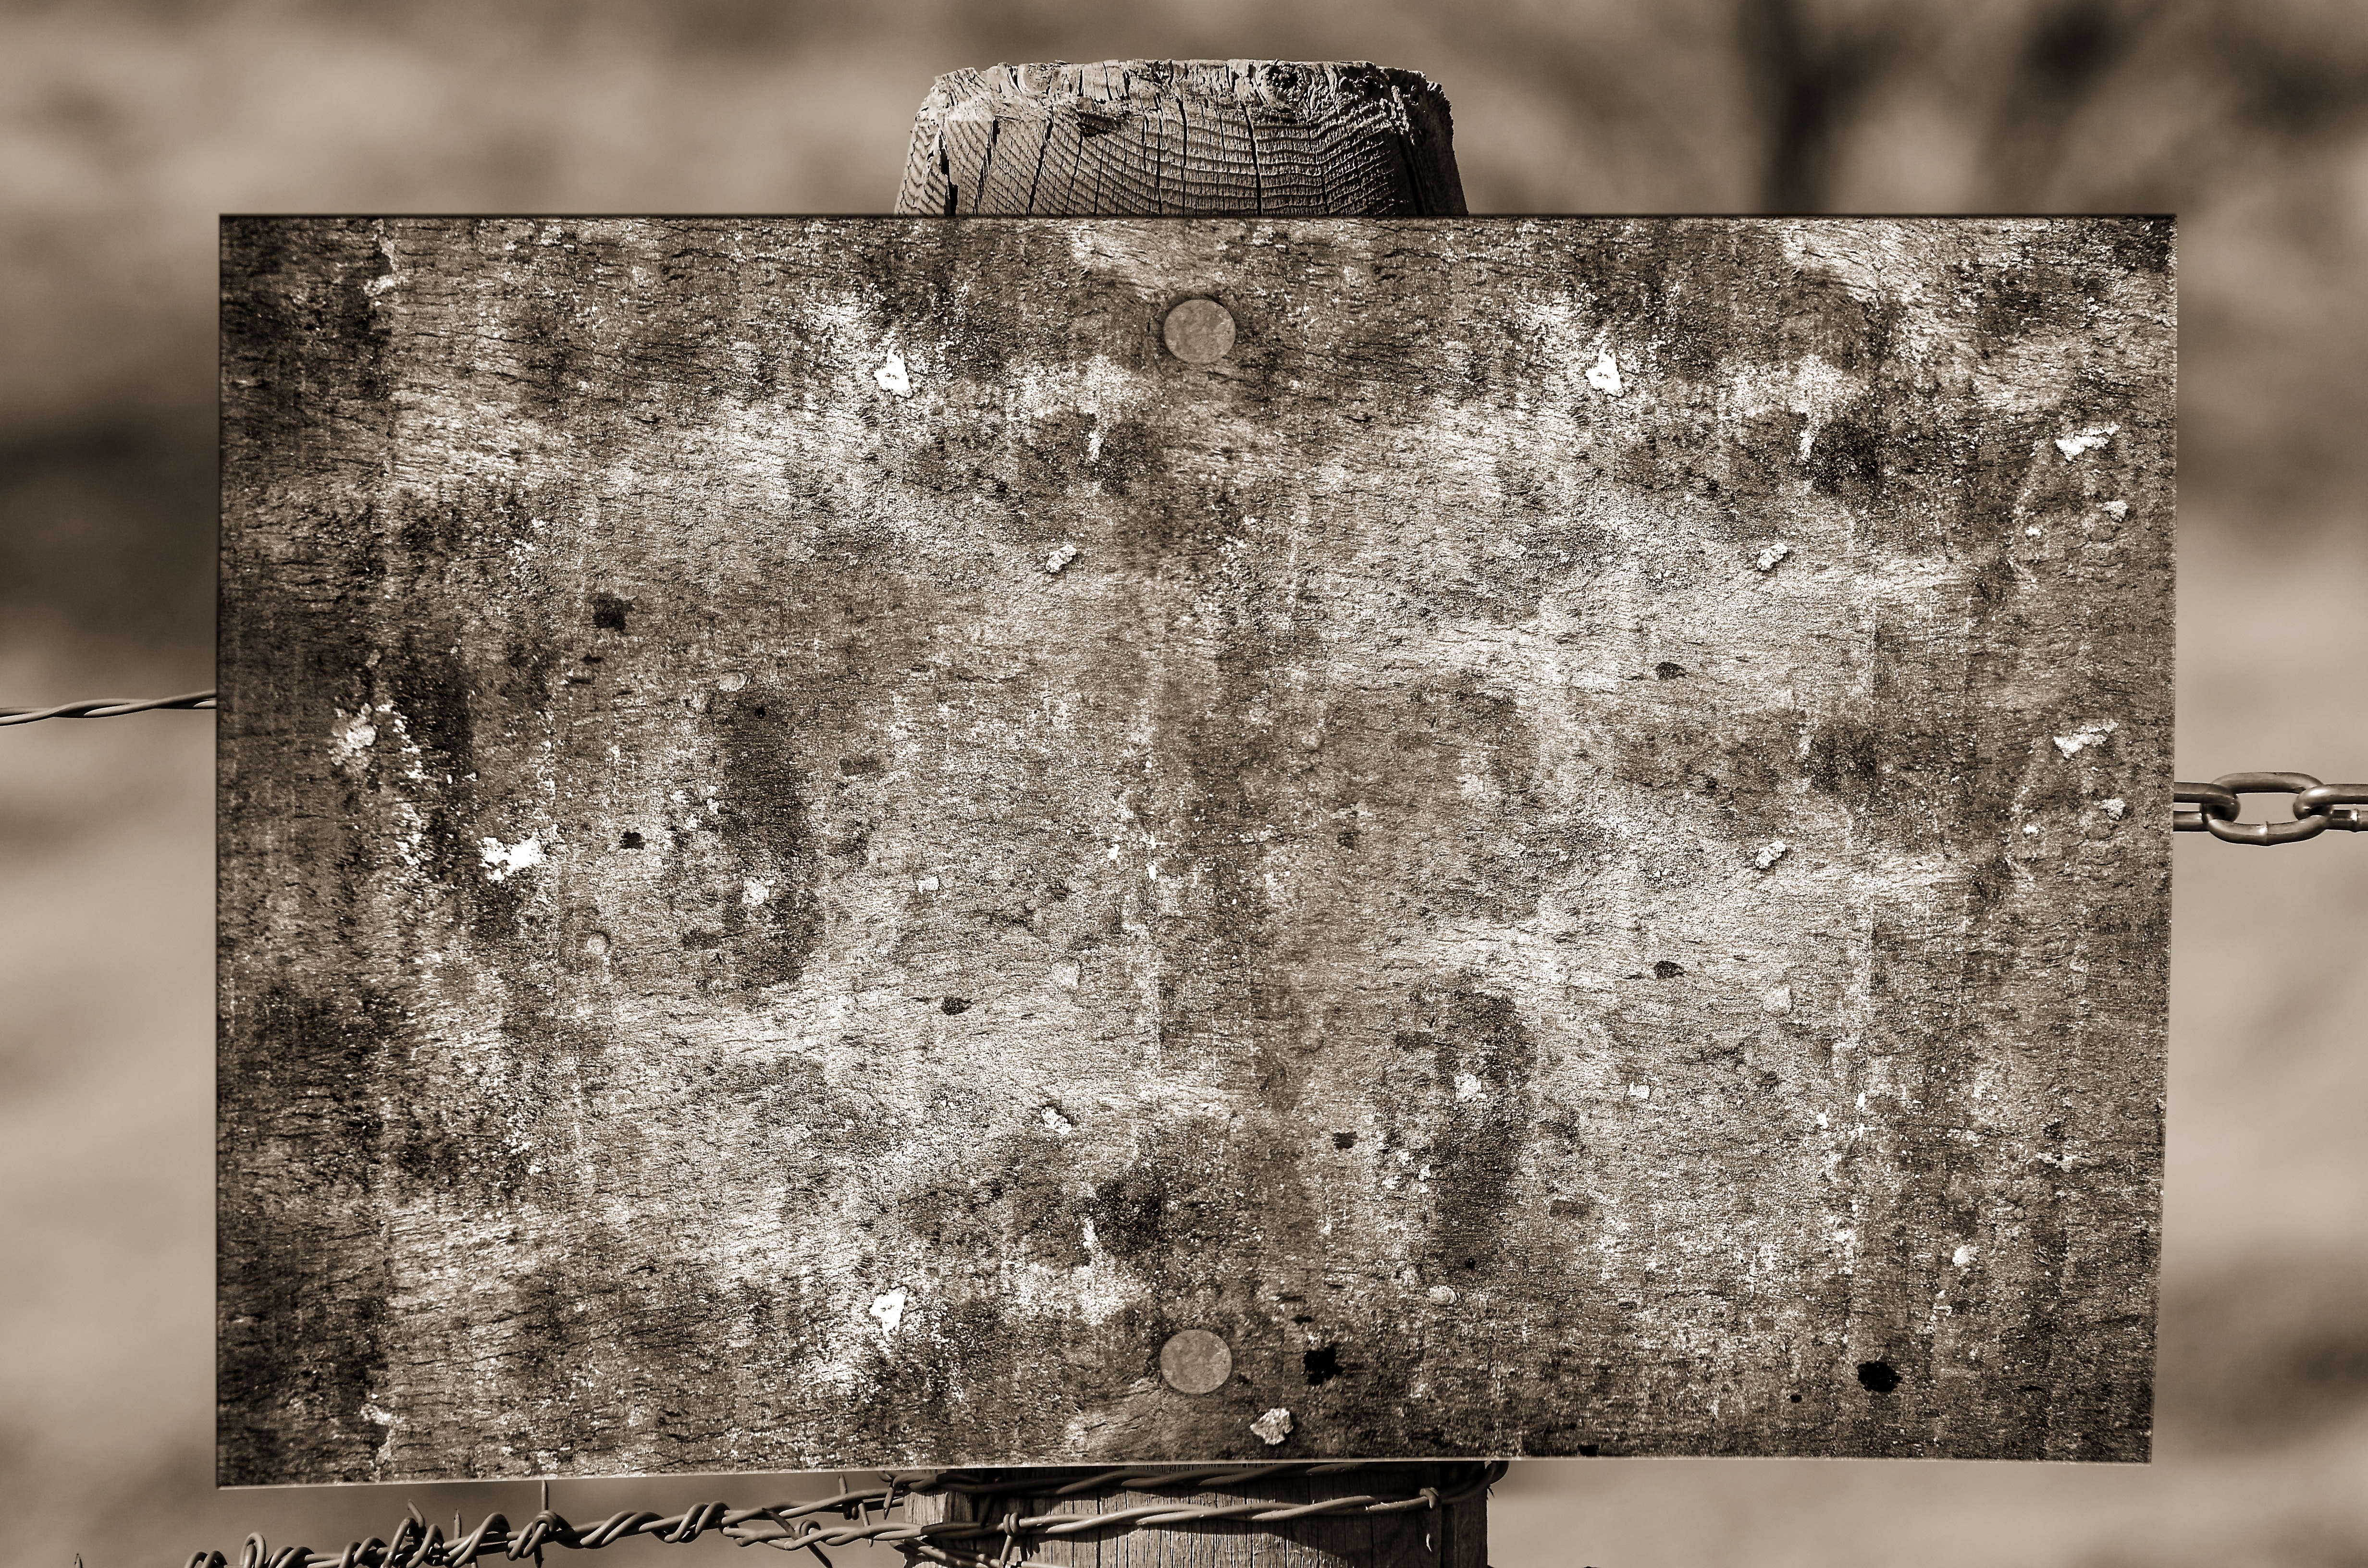 Grayscale photography of brown wooden board on fence